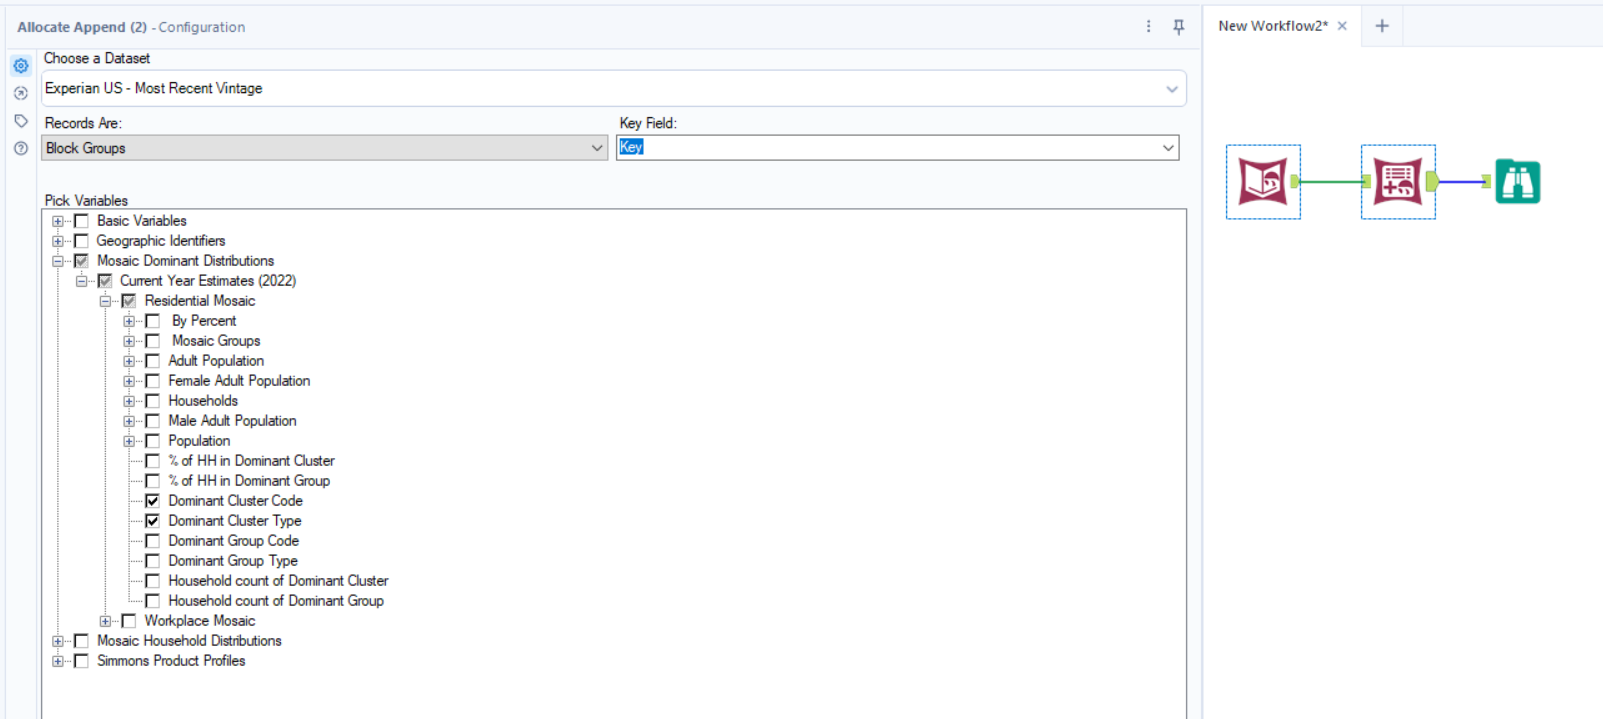 Image that shows the Allocate Append tool configuration window.